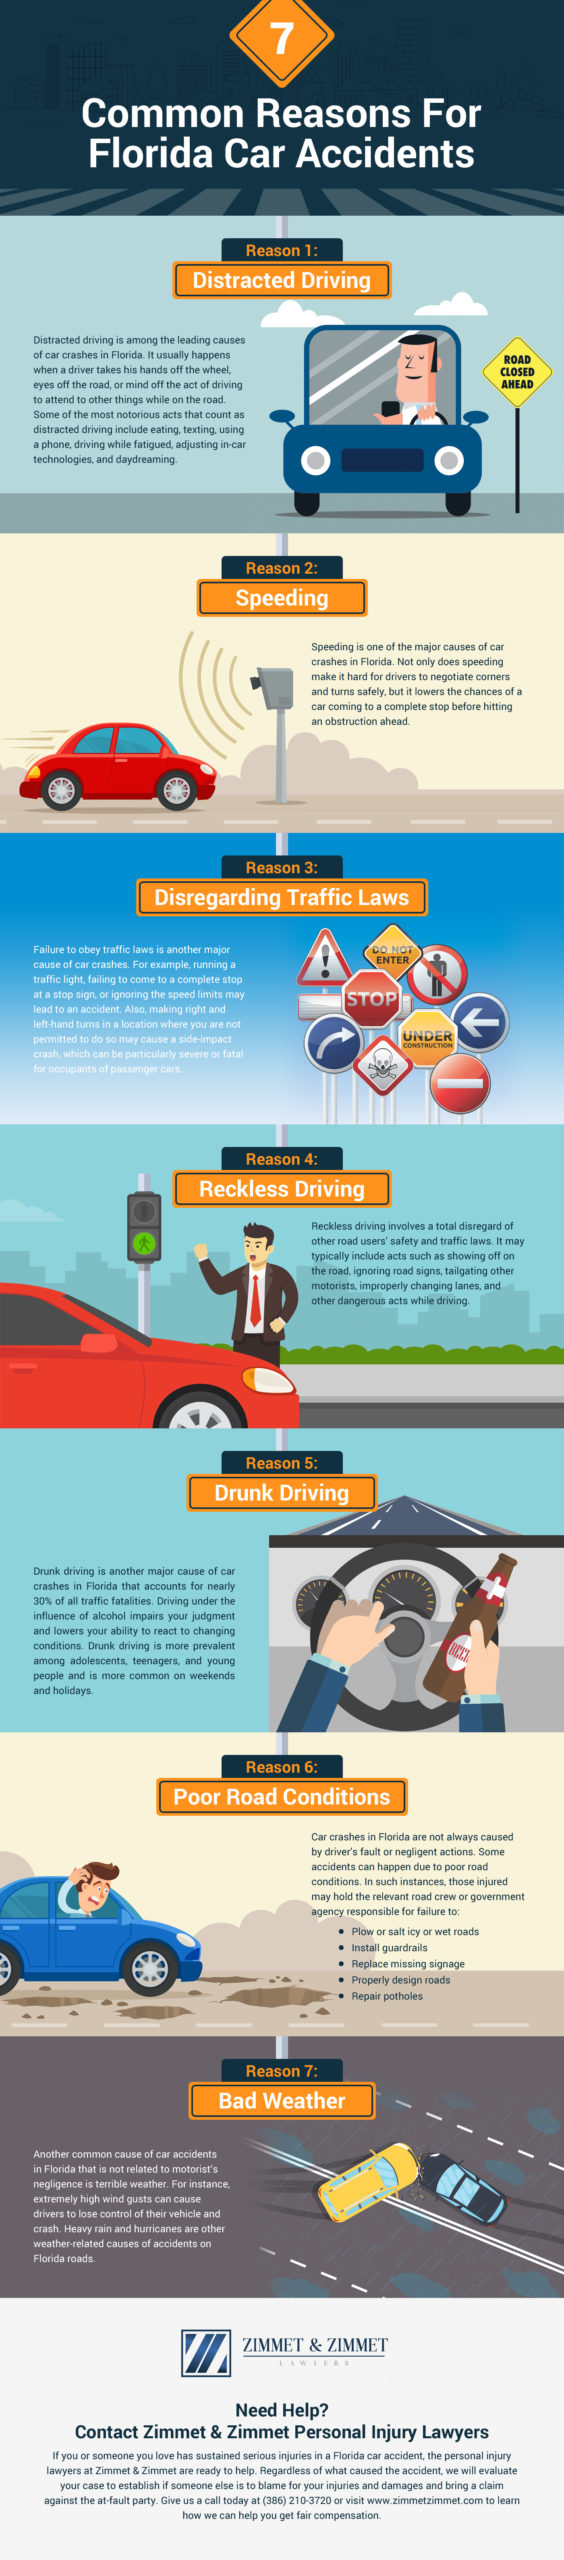 7 common reasons for Florida car accidents infographic